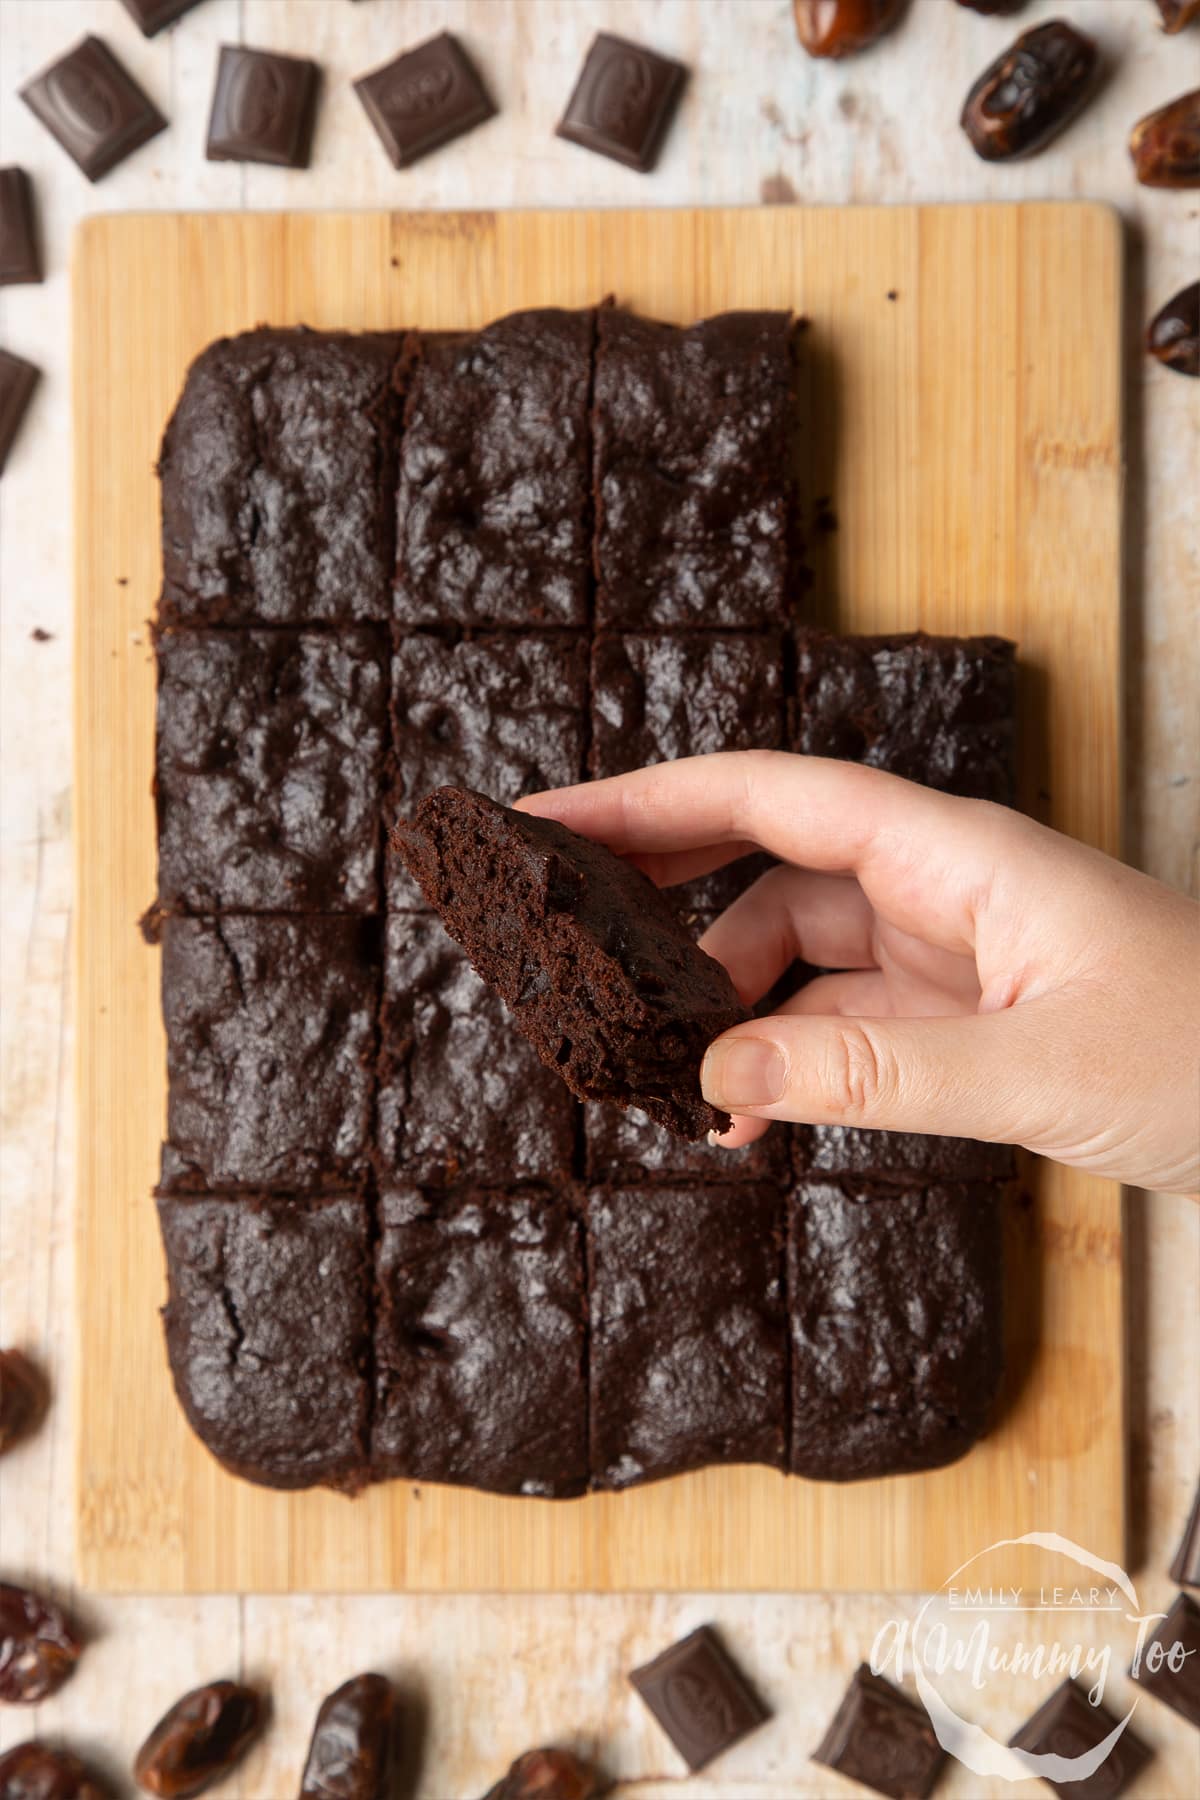 Whole grain brownies made with dates and dark chocolate arranged on a pale wooden board. A hand holds one.